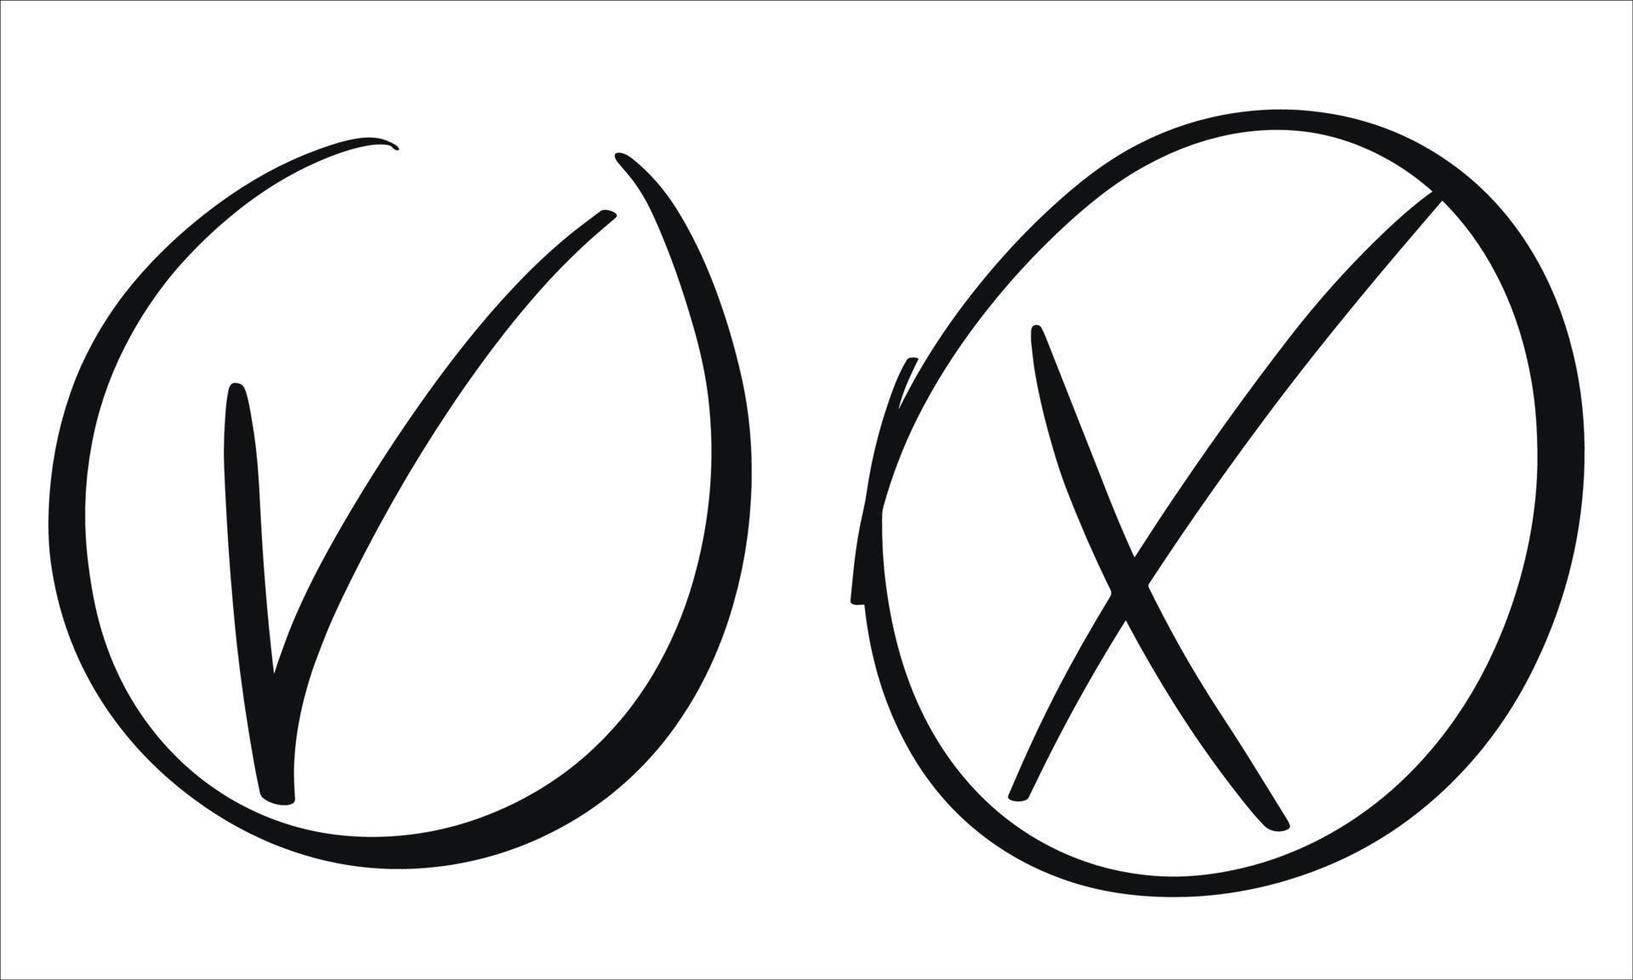 Black and white set of check and cross. Signs of agreement and denial. YES and NO symbol for voting, testing. Flat tick. Vector isolated icon. The sign is prohibited.